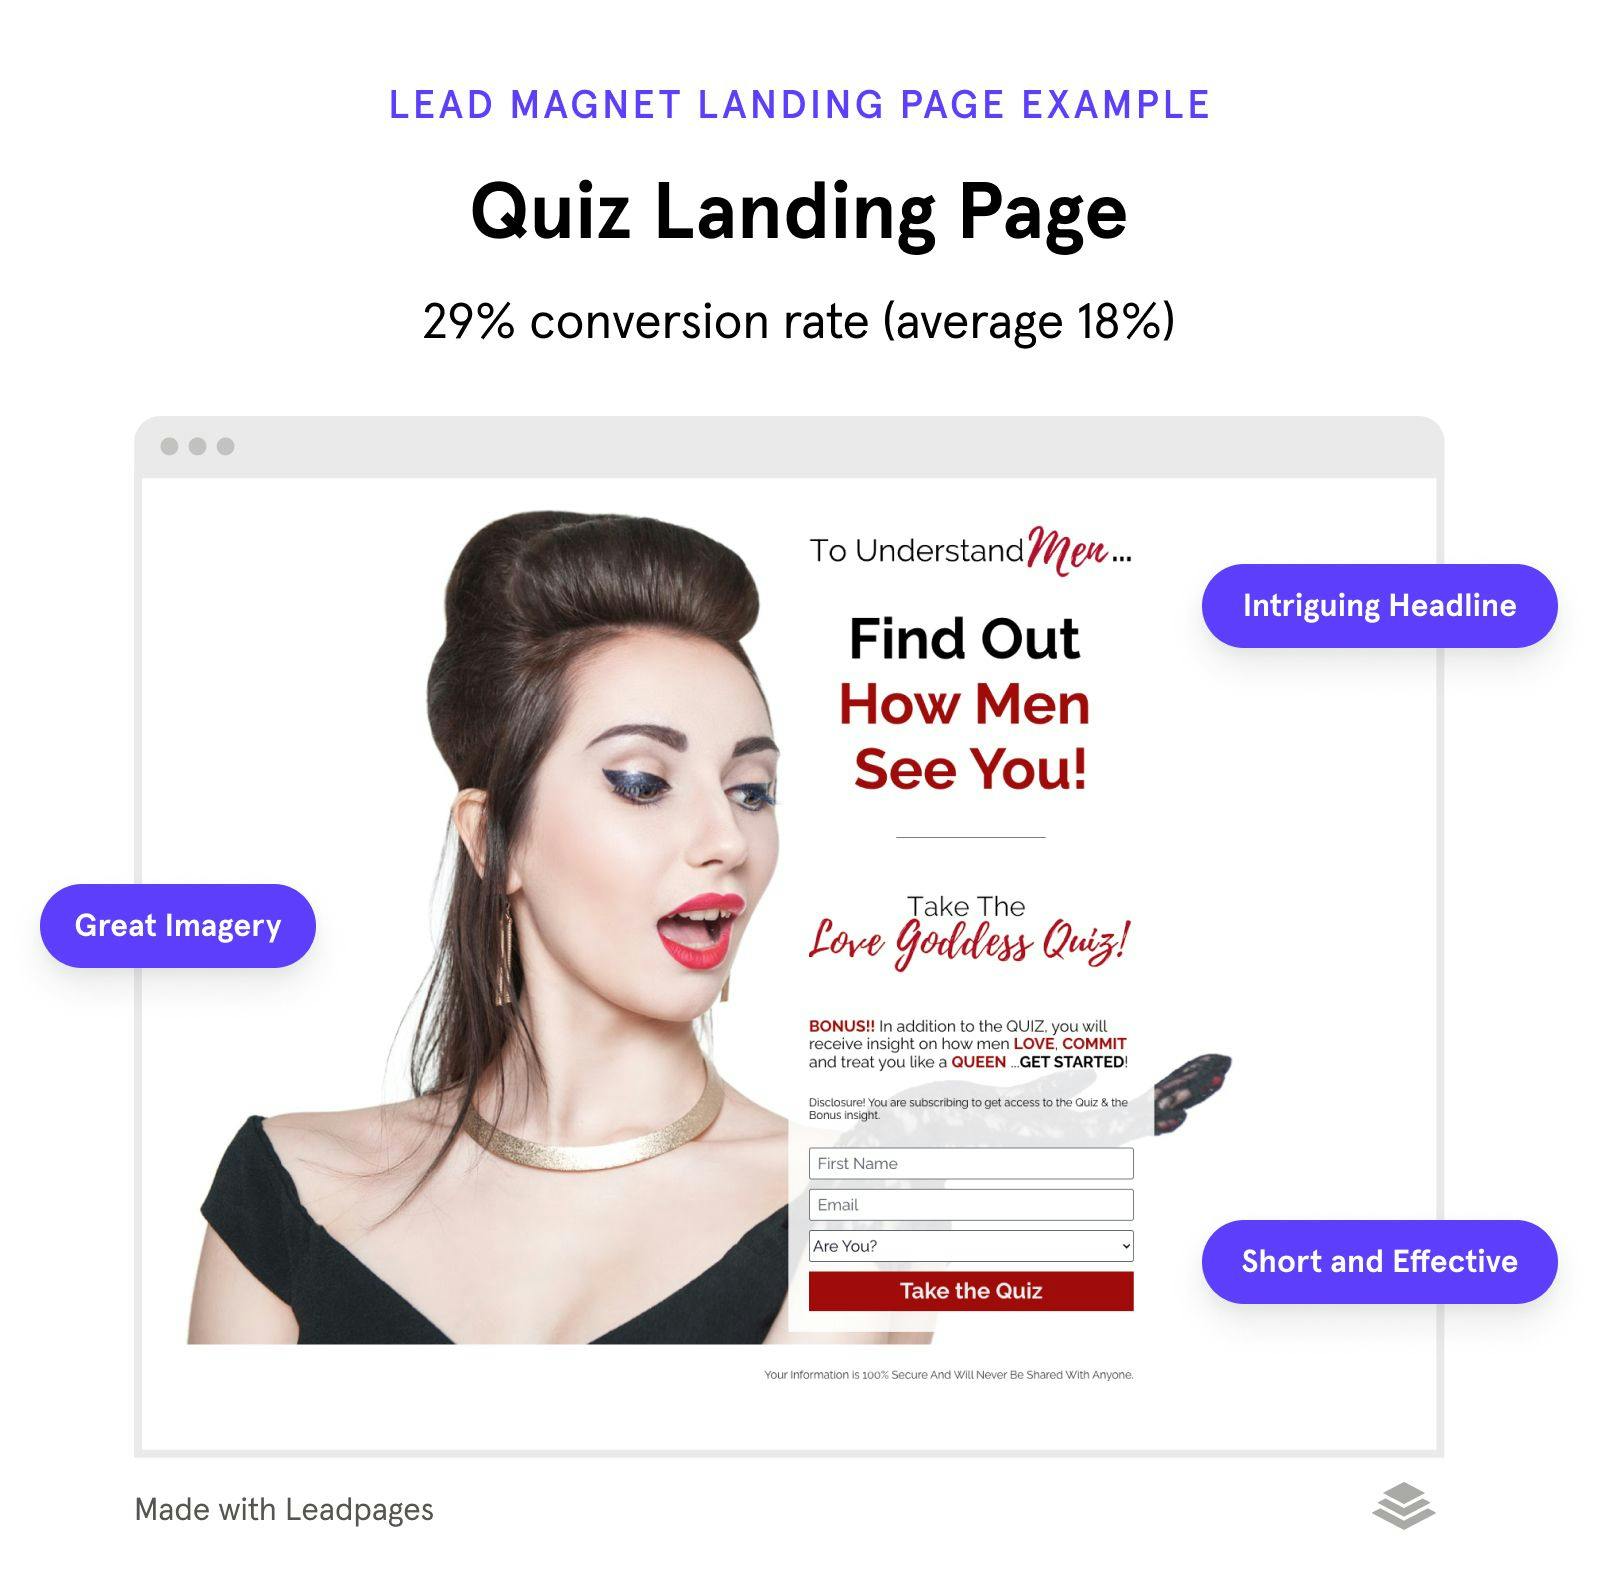 Quiz lead magnet landing page example